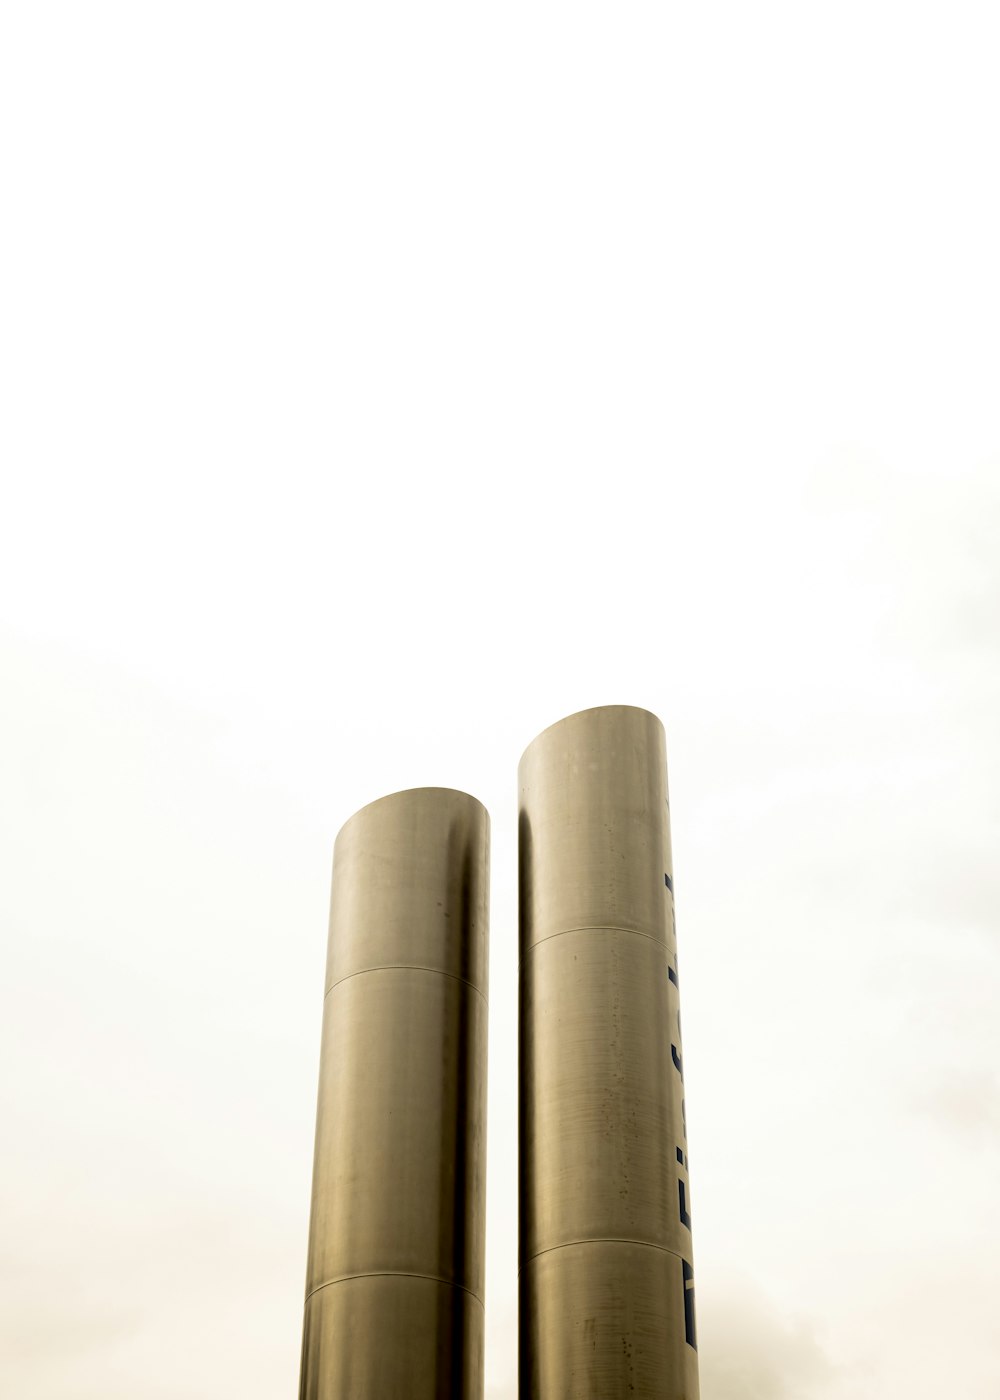 a couple of large metal cylinders sitting next to each other